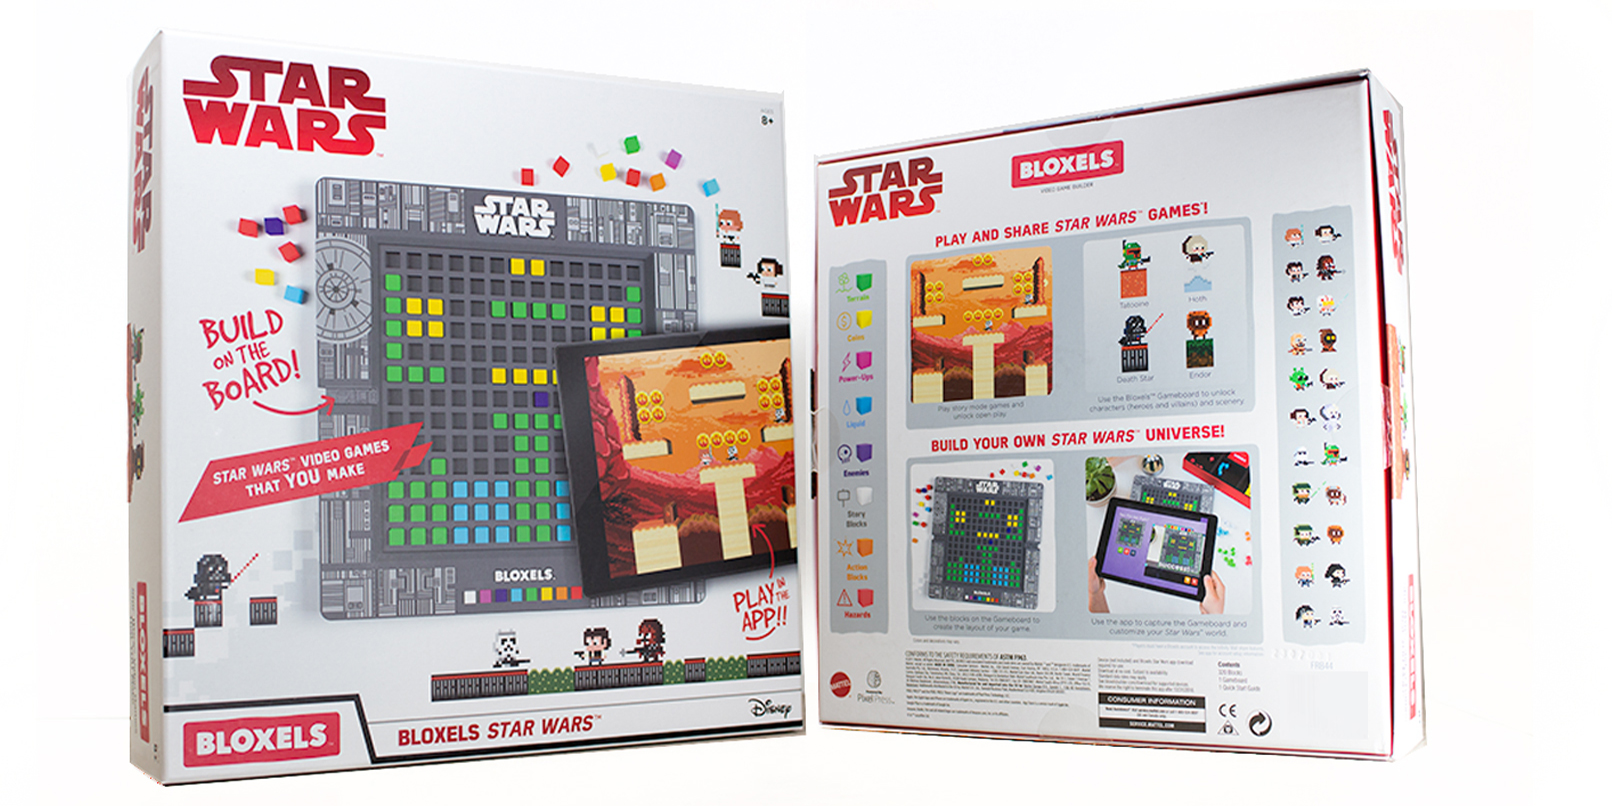 Bloxels Build Your Own Video Game AND Bloxels Star Wars Build Your Own Vide...